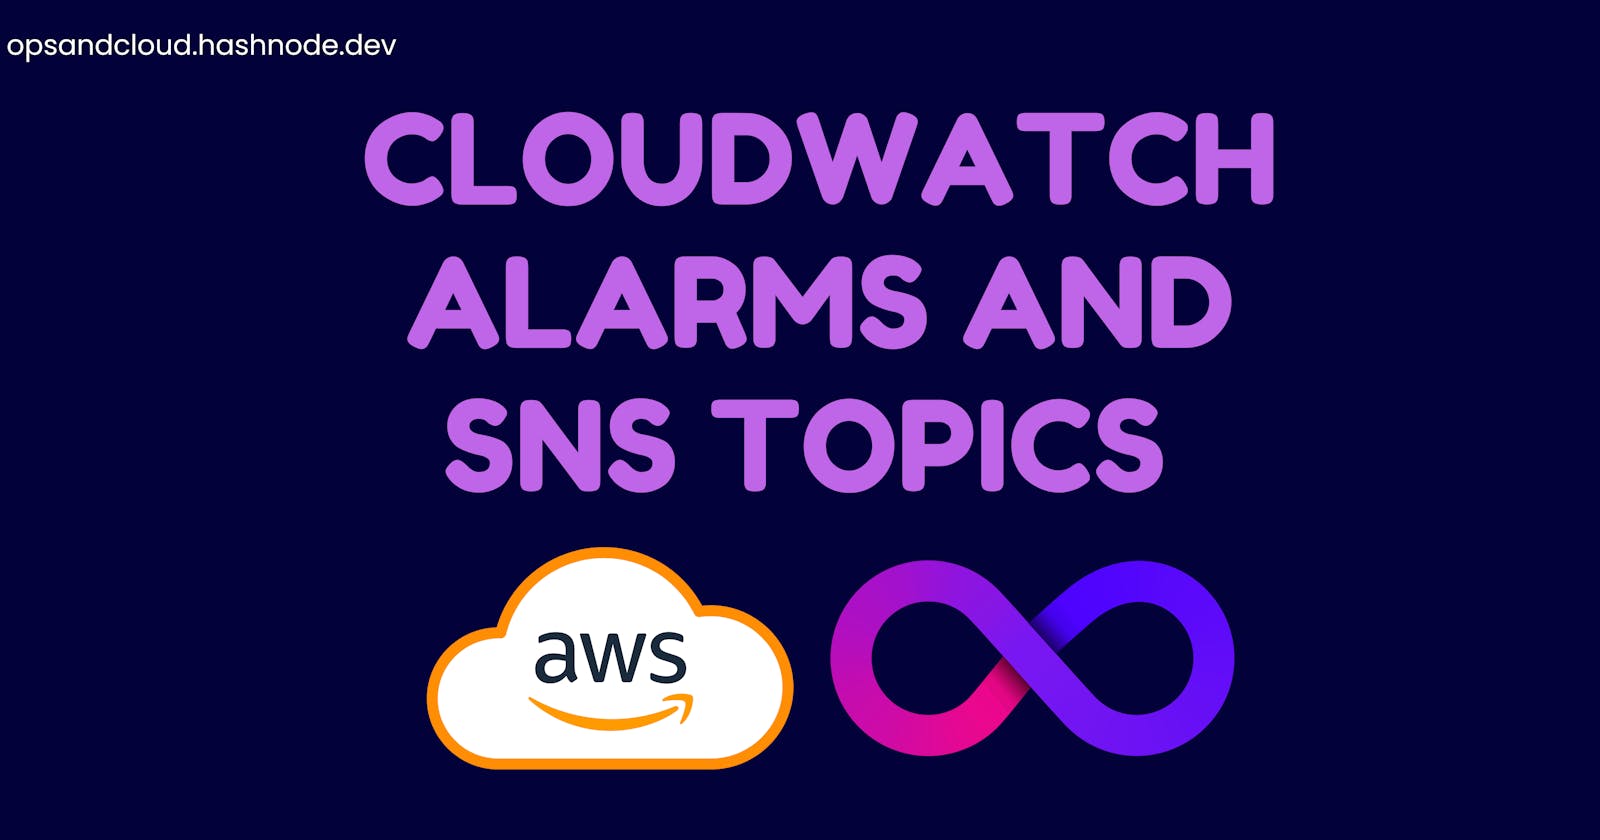 Day 46: Set-up CloudWatch Alarms and SNS Topics in AWS